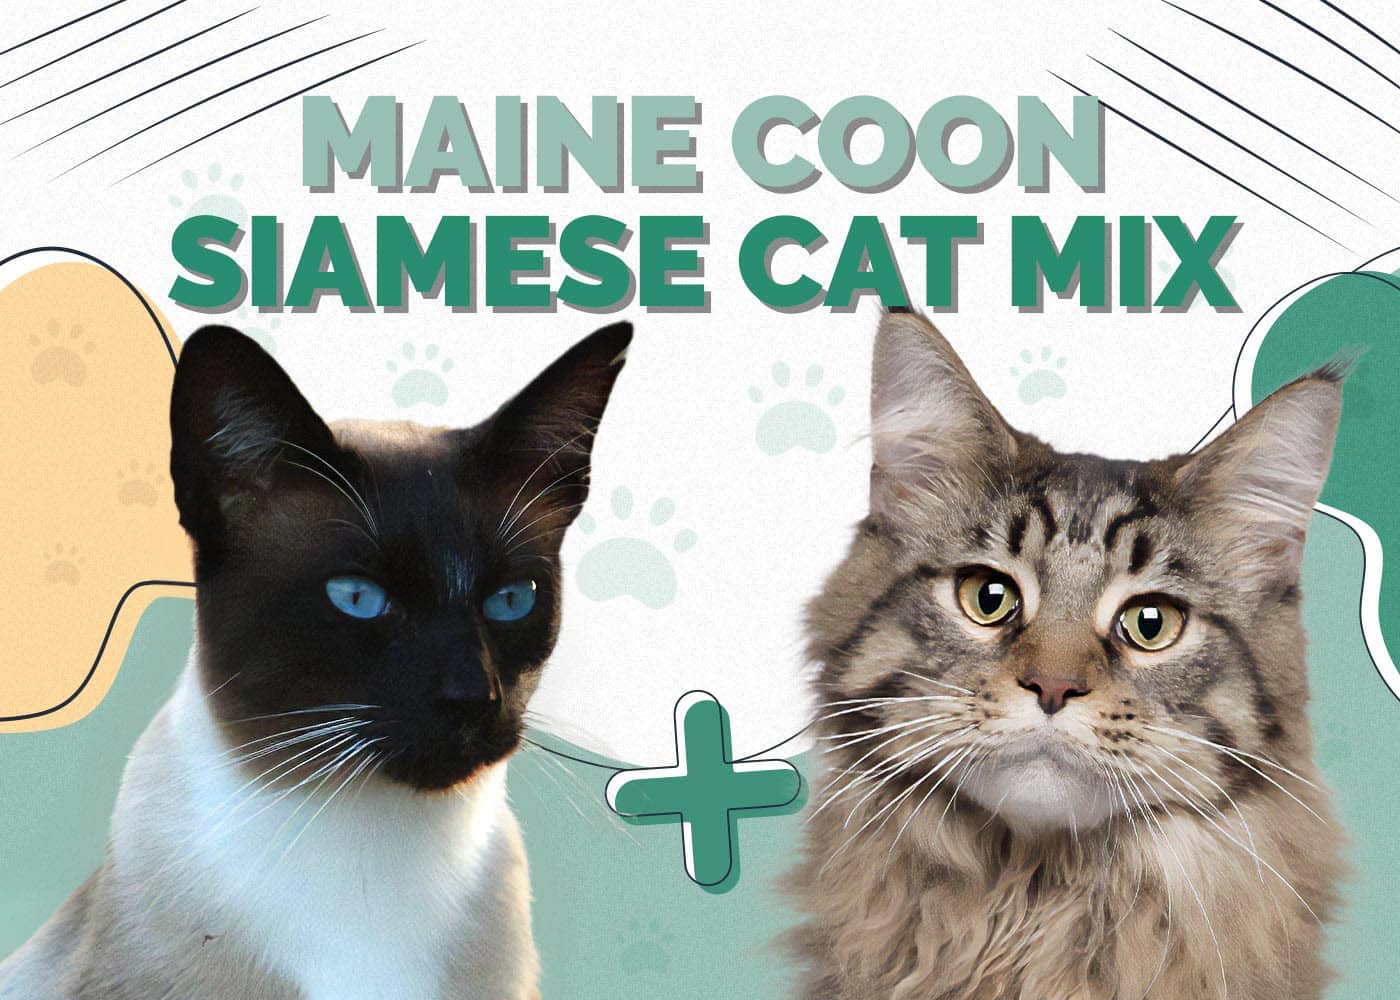 Maine Coon & Siamese Cat Mix